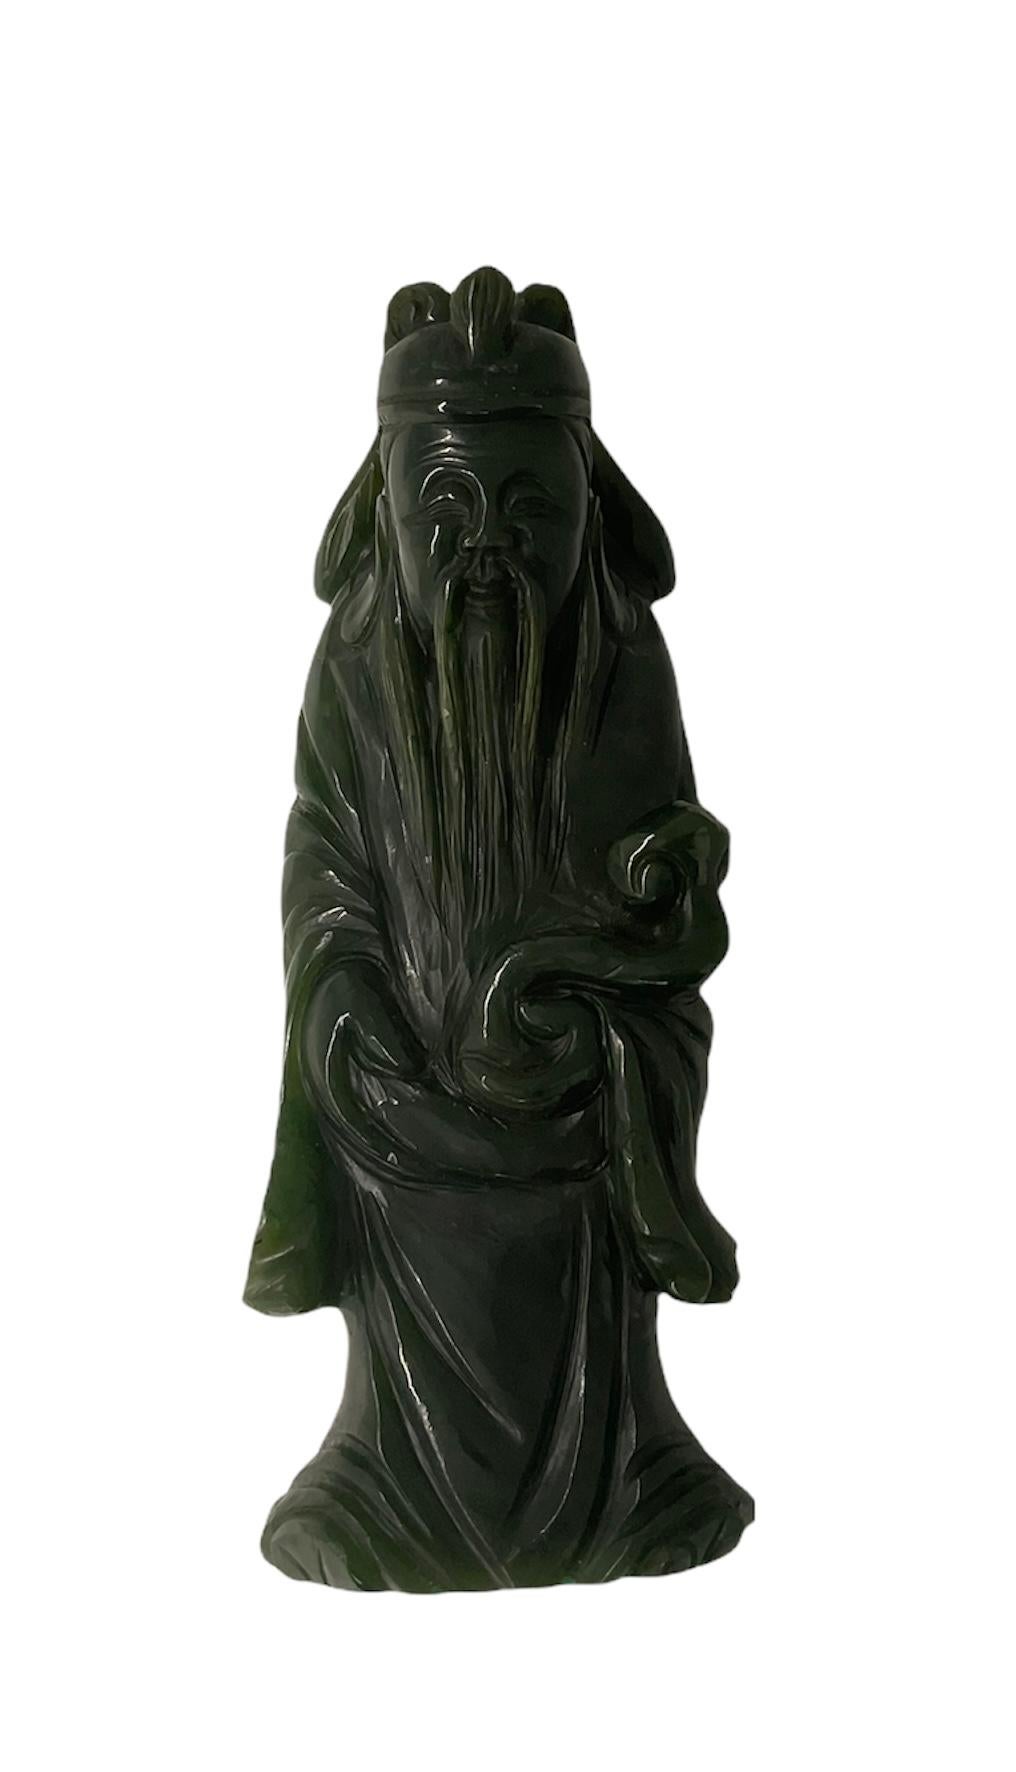 Hand Carved Green Pine Color Jade Small Chinese Wise Man Sculpture/Figurine 8